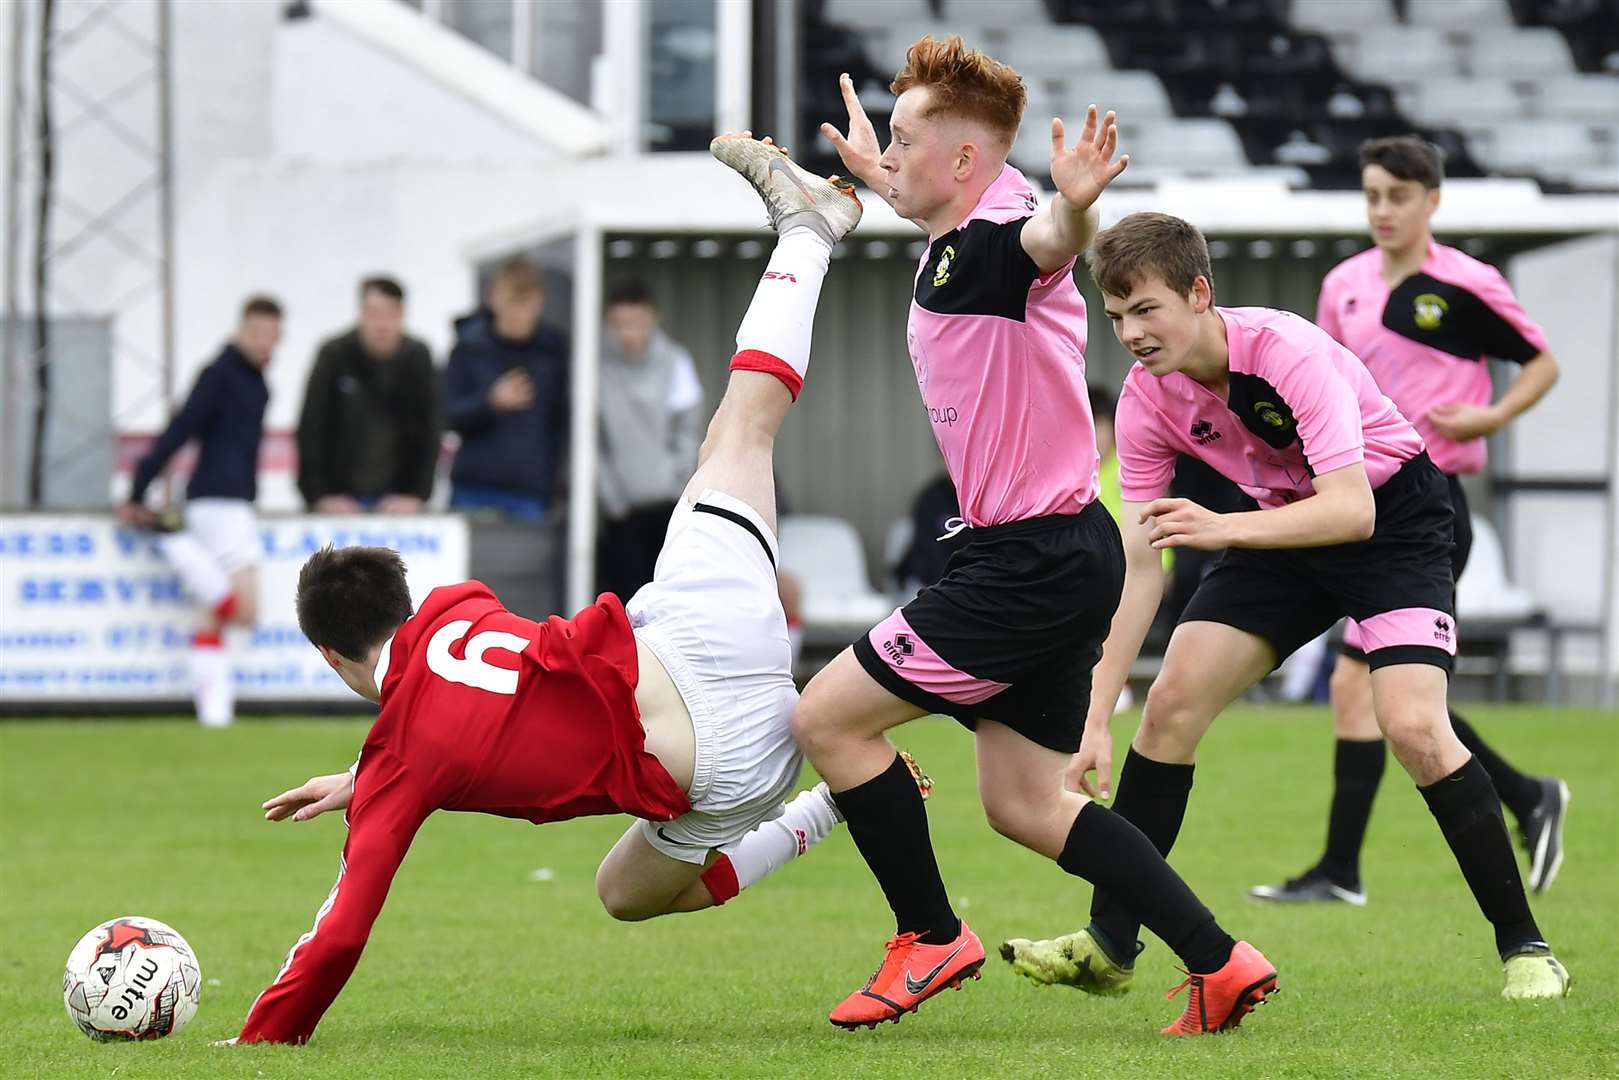 Scott Macdonald of Wick Academy U17s is upended by Clach's Aidan Mackinnon during a 2-2 draw at Harmsworth Park in September. Picture: Mel Roger